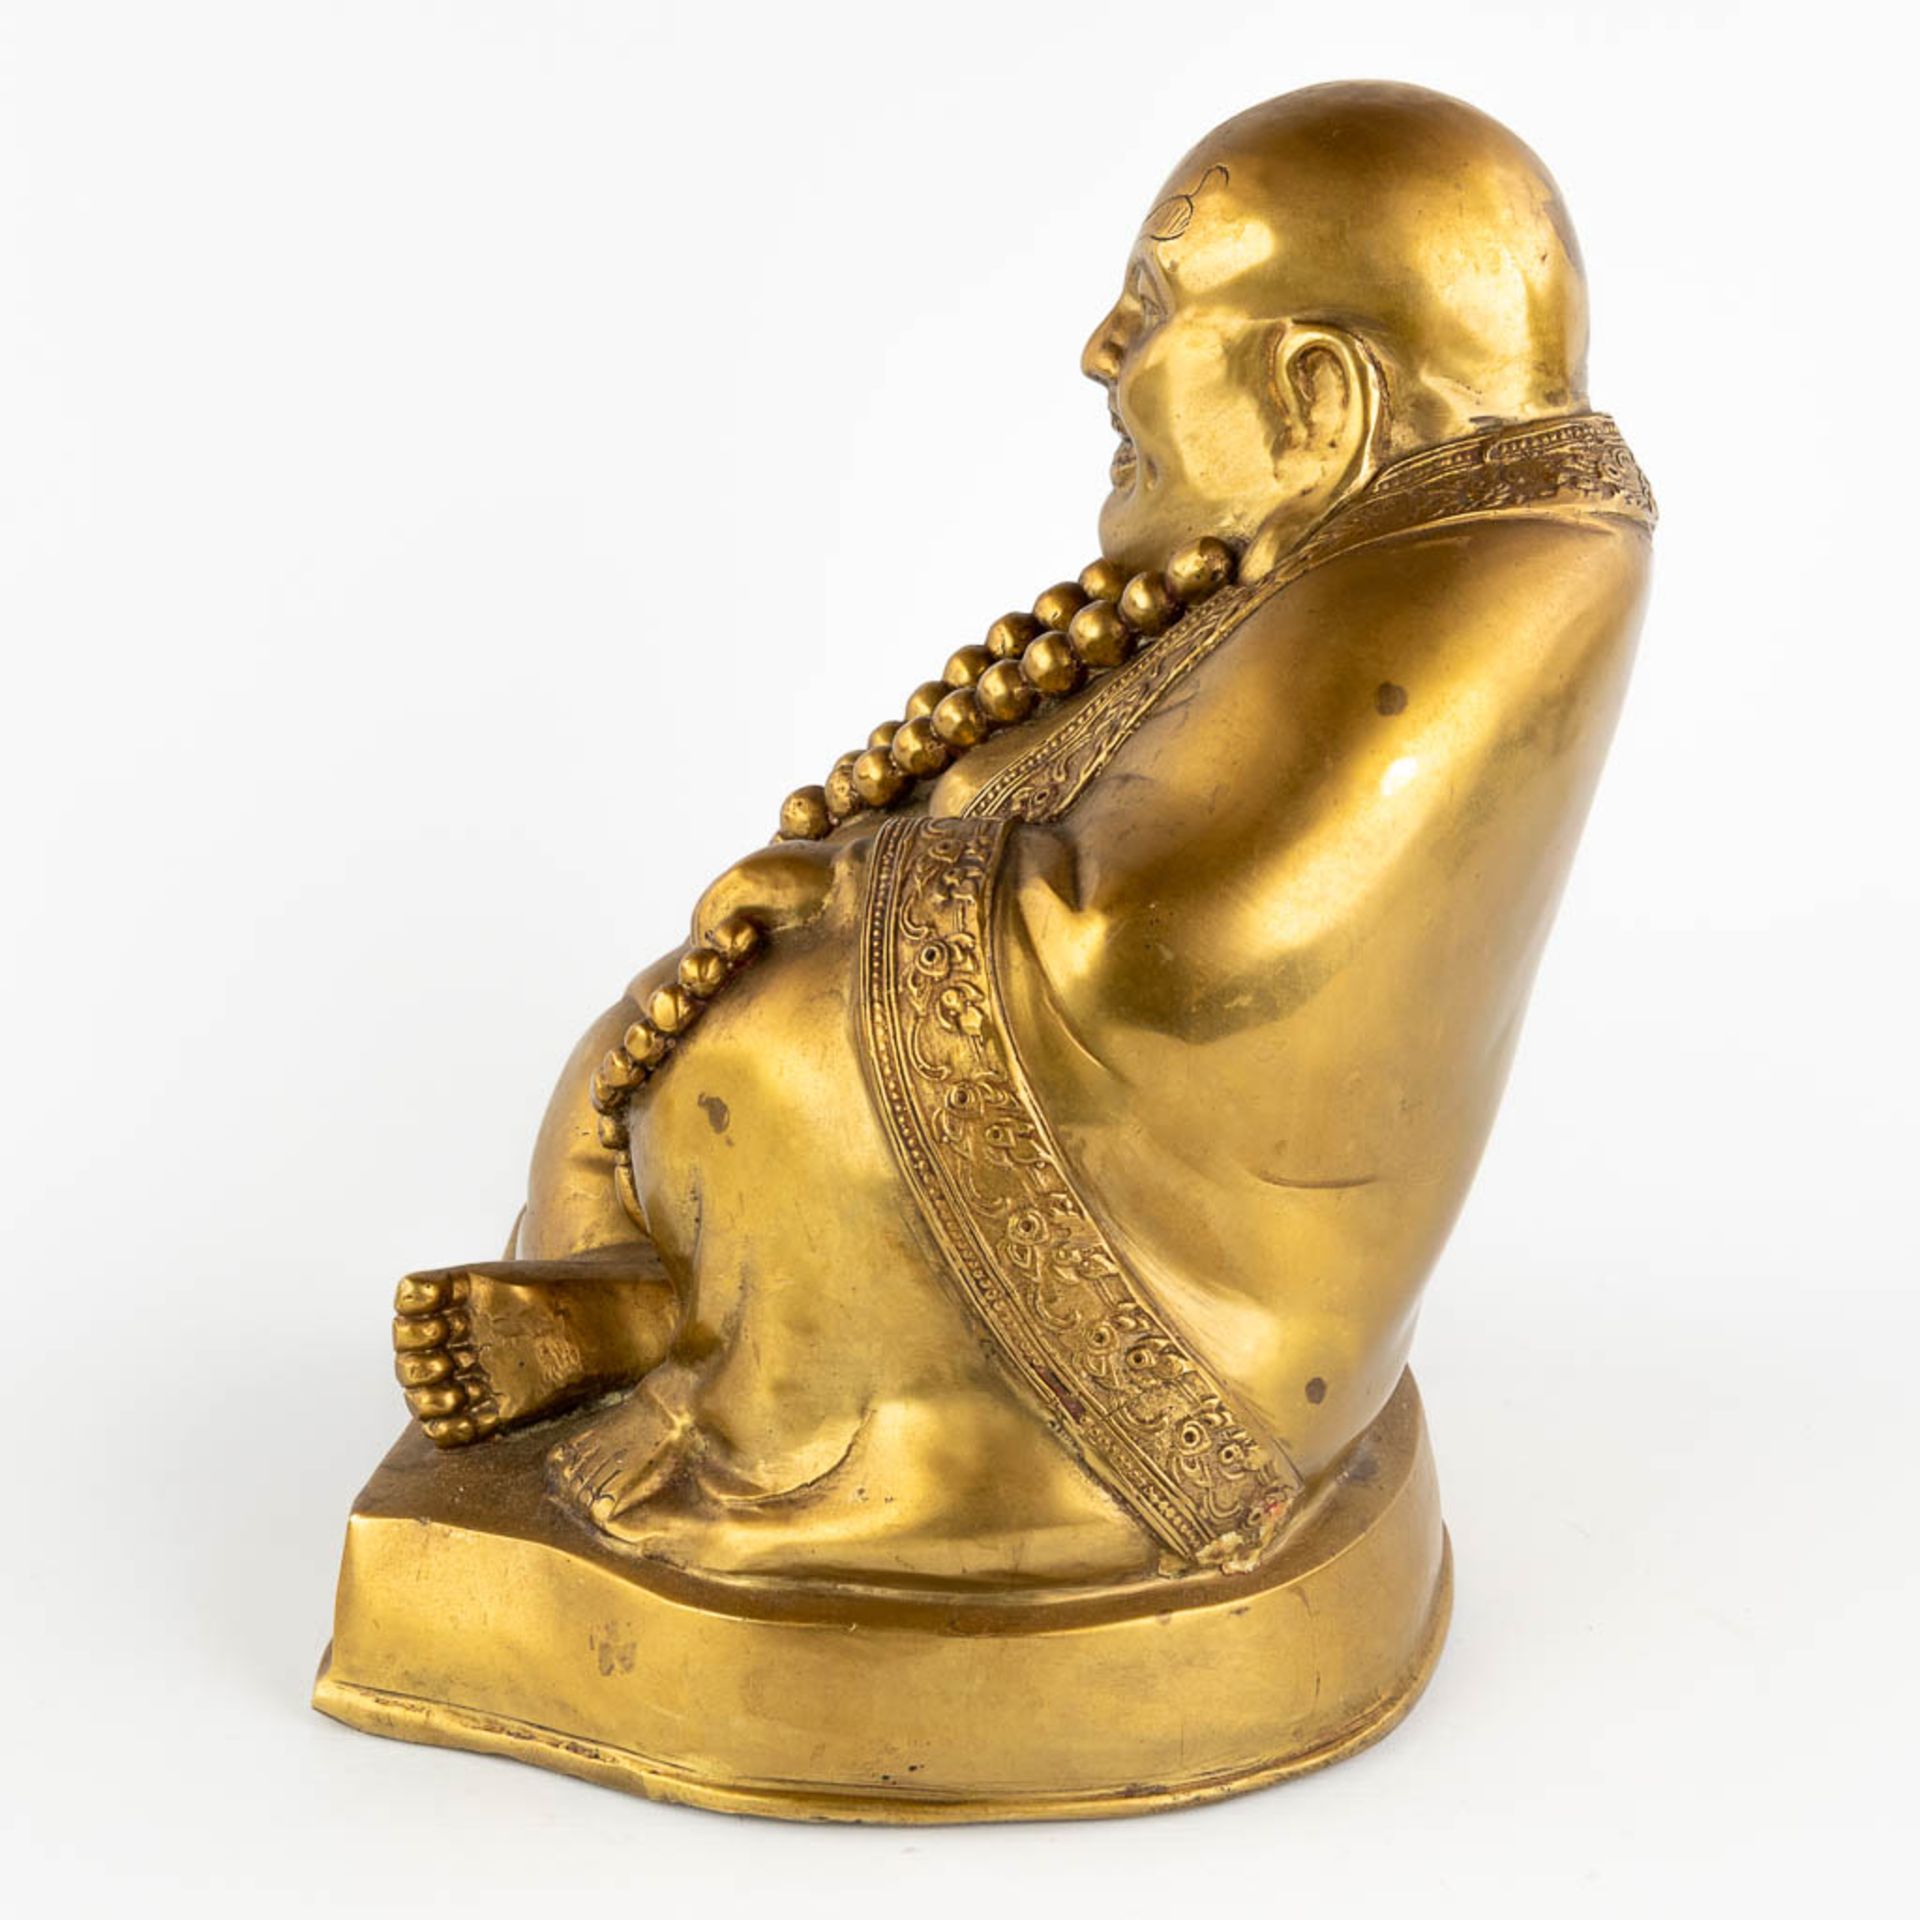 A Chinese laughing buddha, polished bronze. (L:27 x W:27 x H:34 cm) - Image 6 of 11